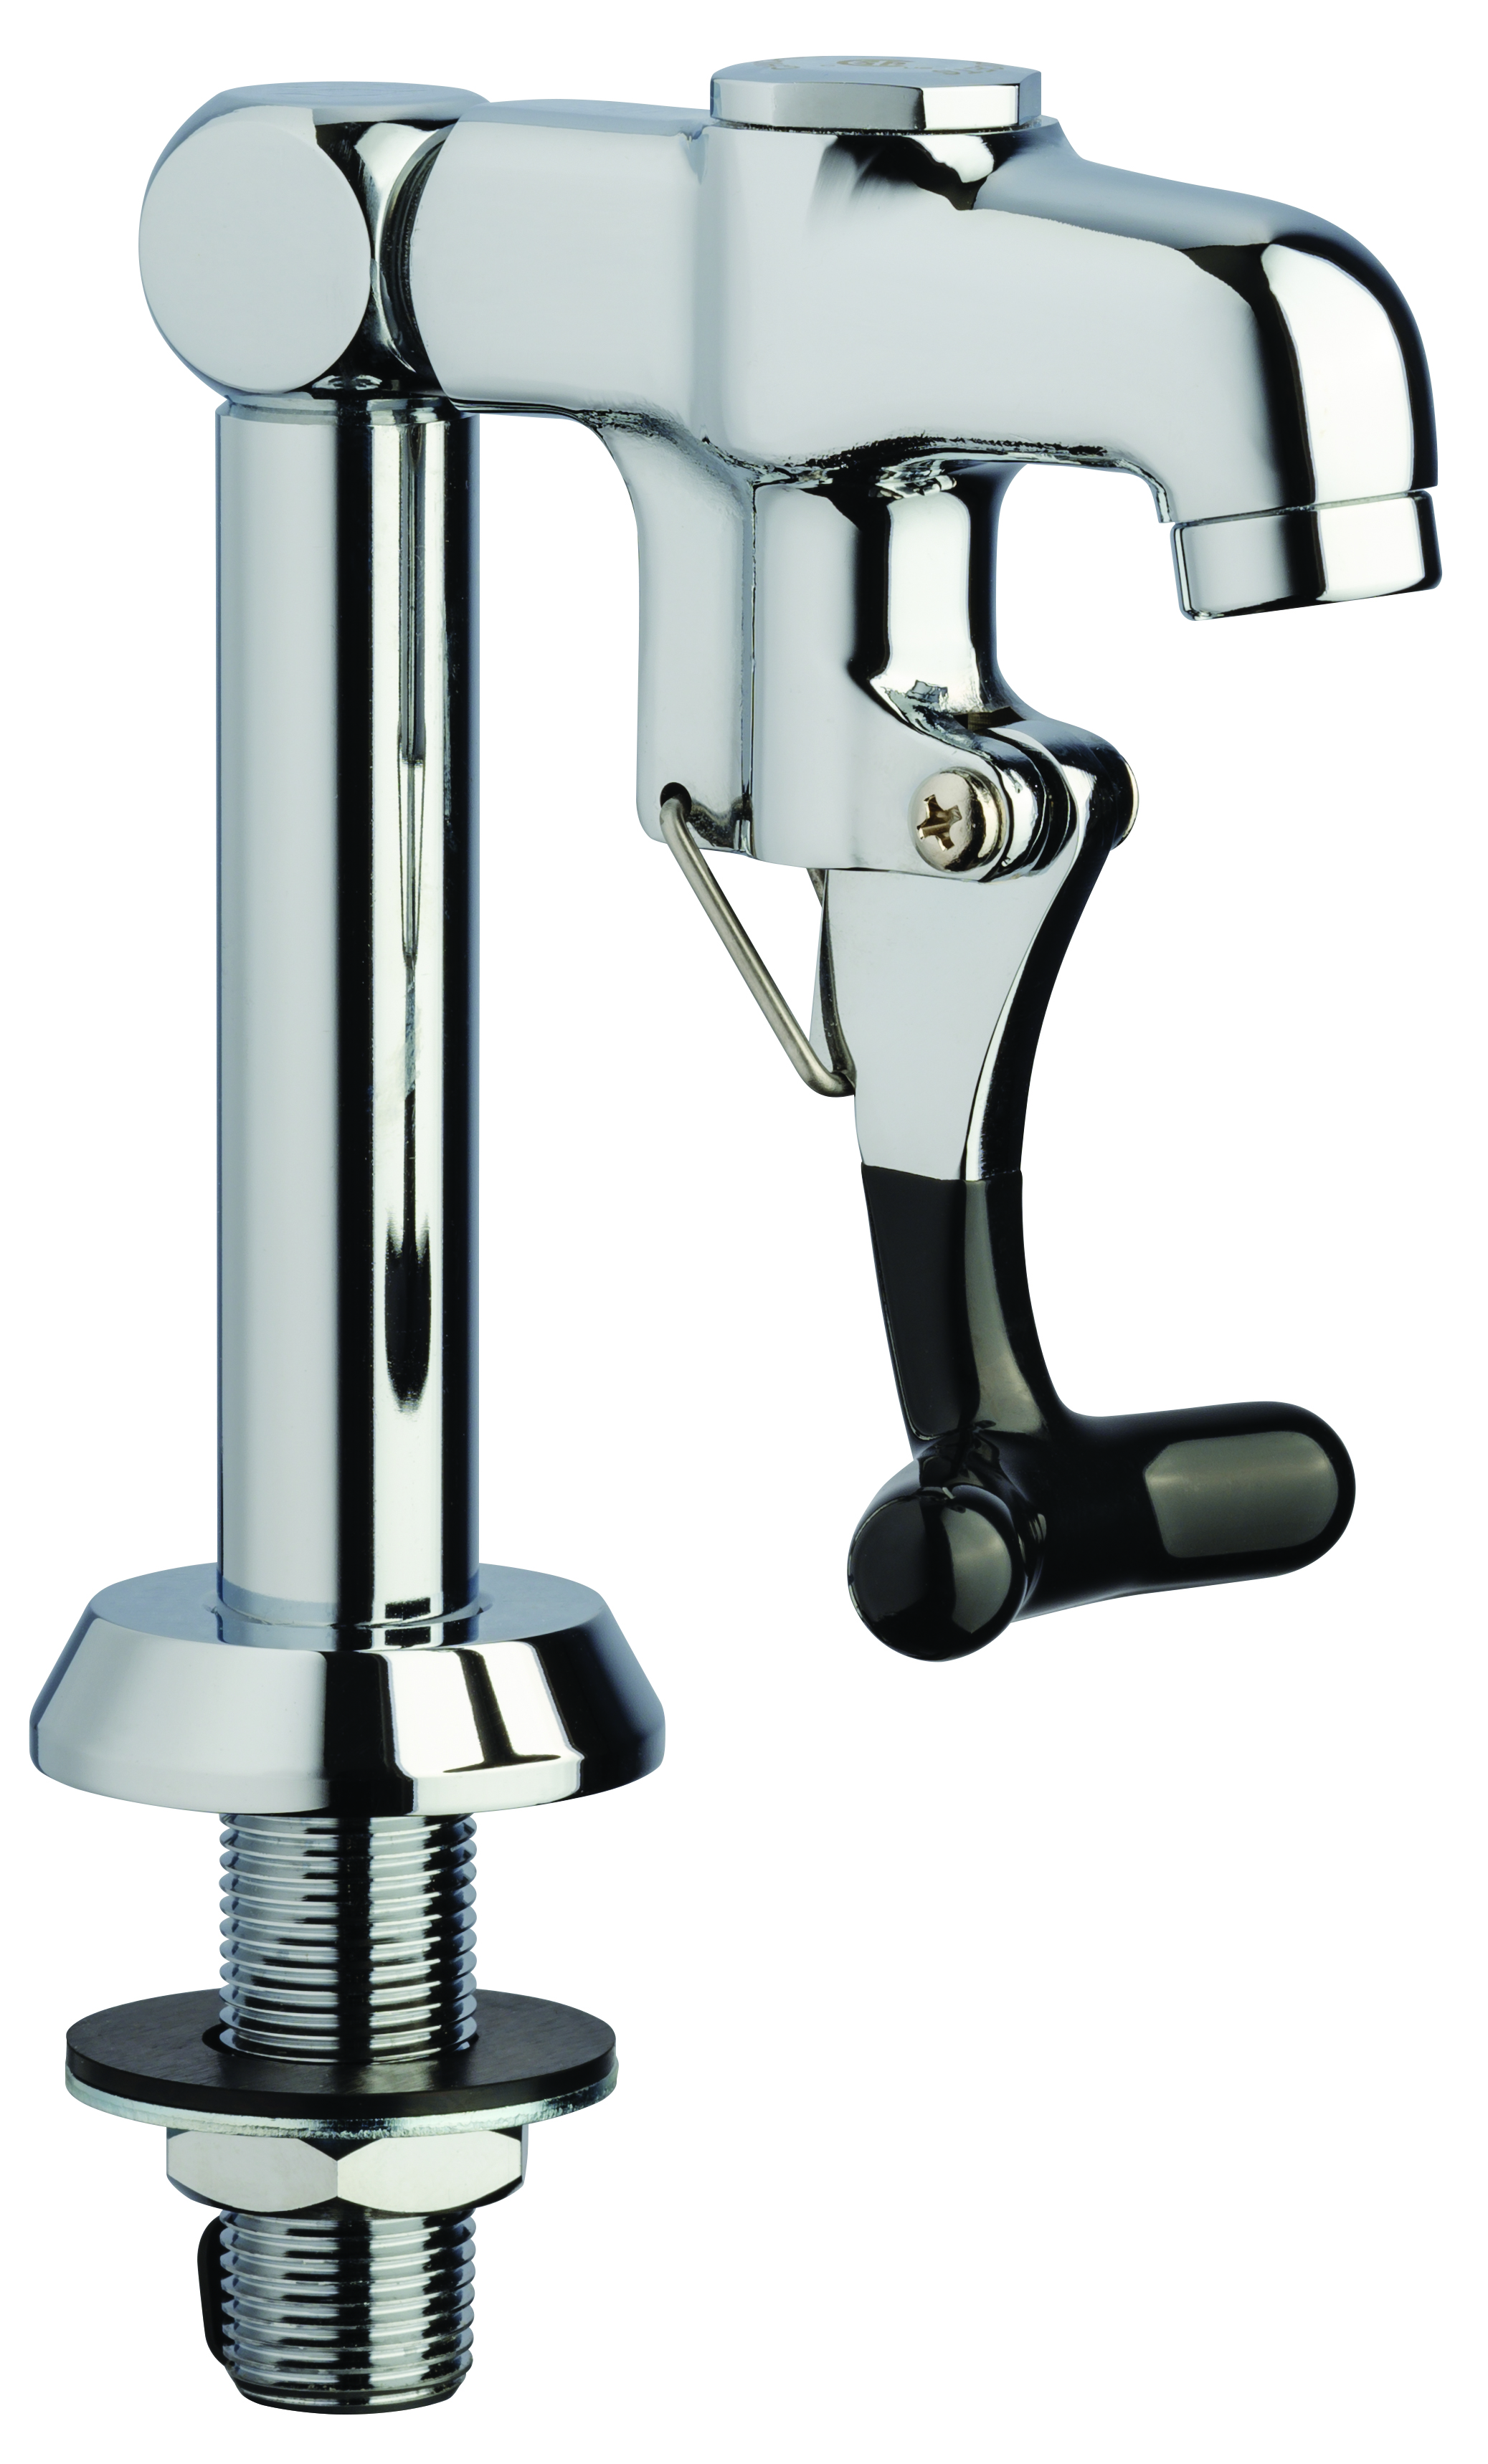 Chicago Faucets Adds New Short Height Glass Filler, Expanding Line of Food Service Products